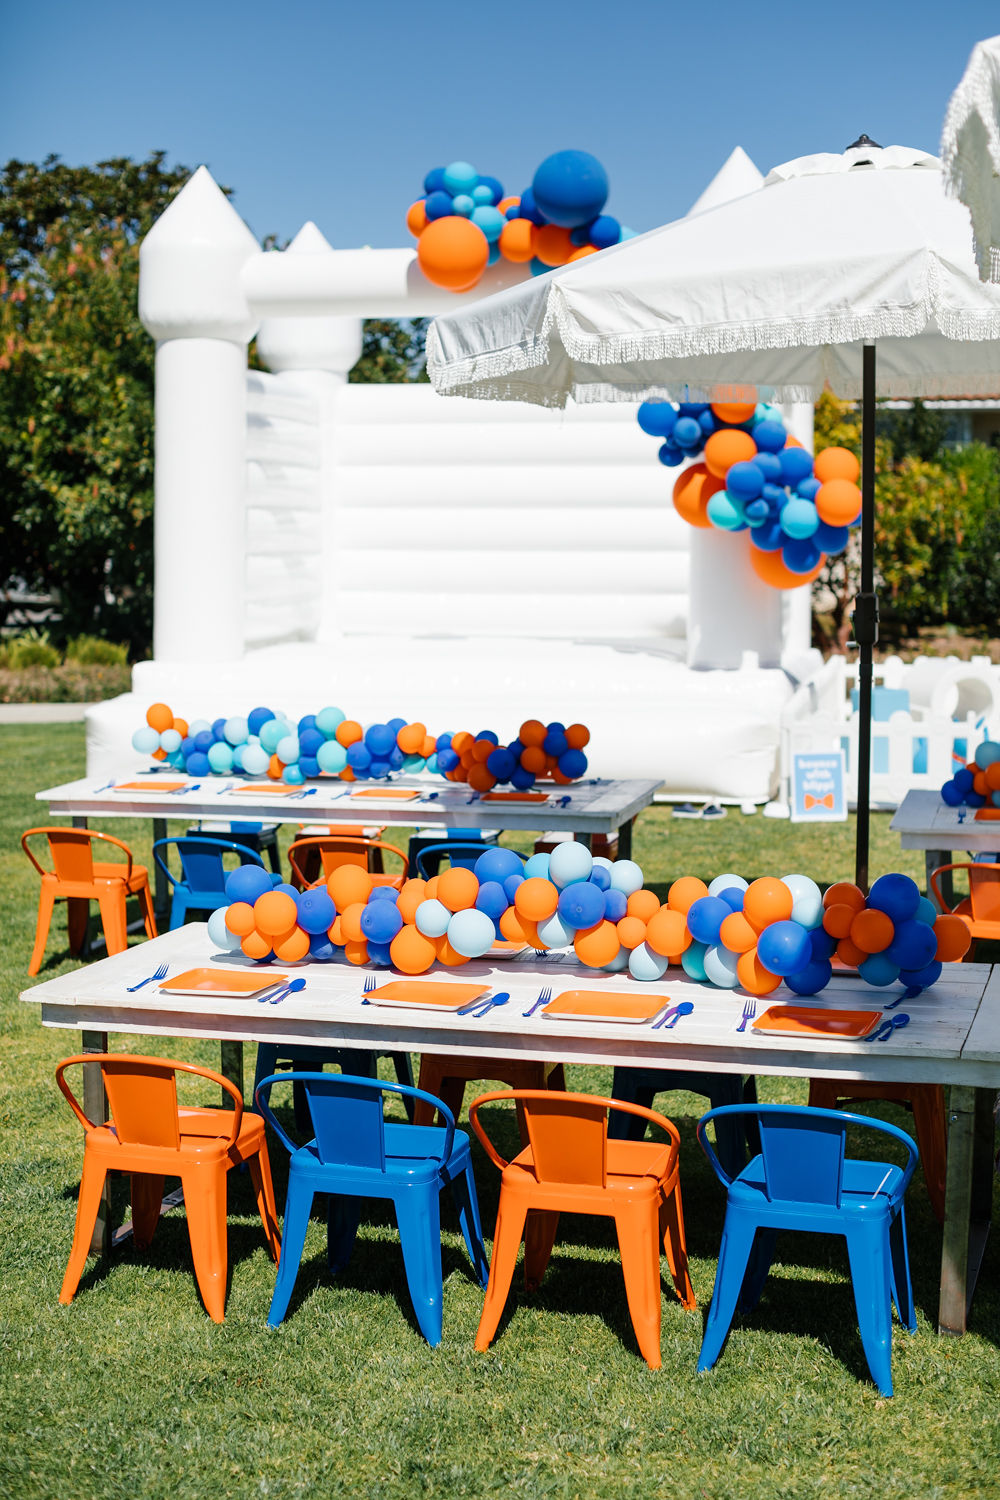 The Blipping Cutest Blippi Party You’ve Ever Seen!